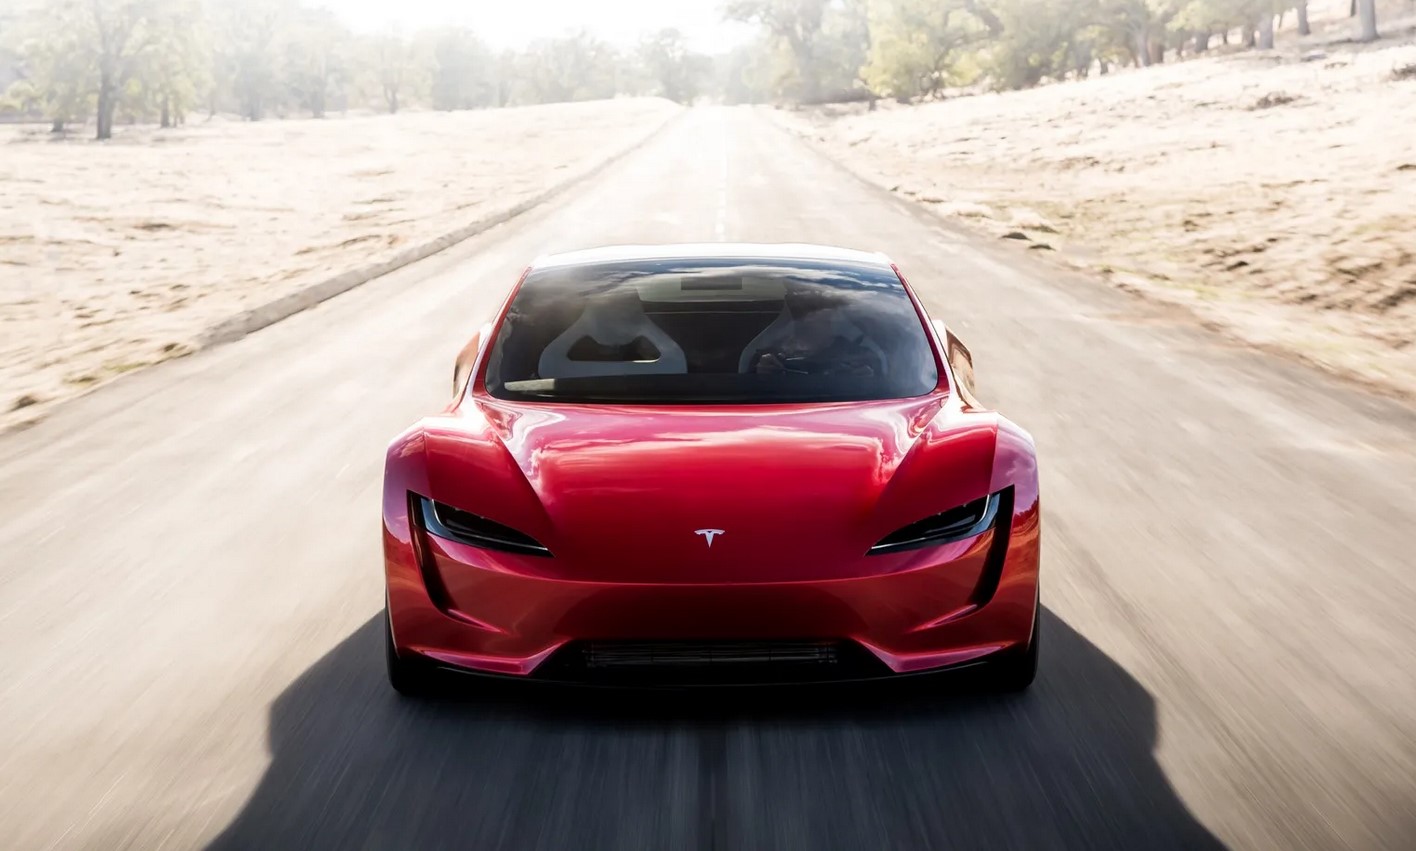 Tesla Roadster will arrive in 2025 with links to SpaceX